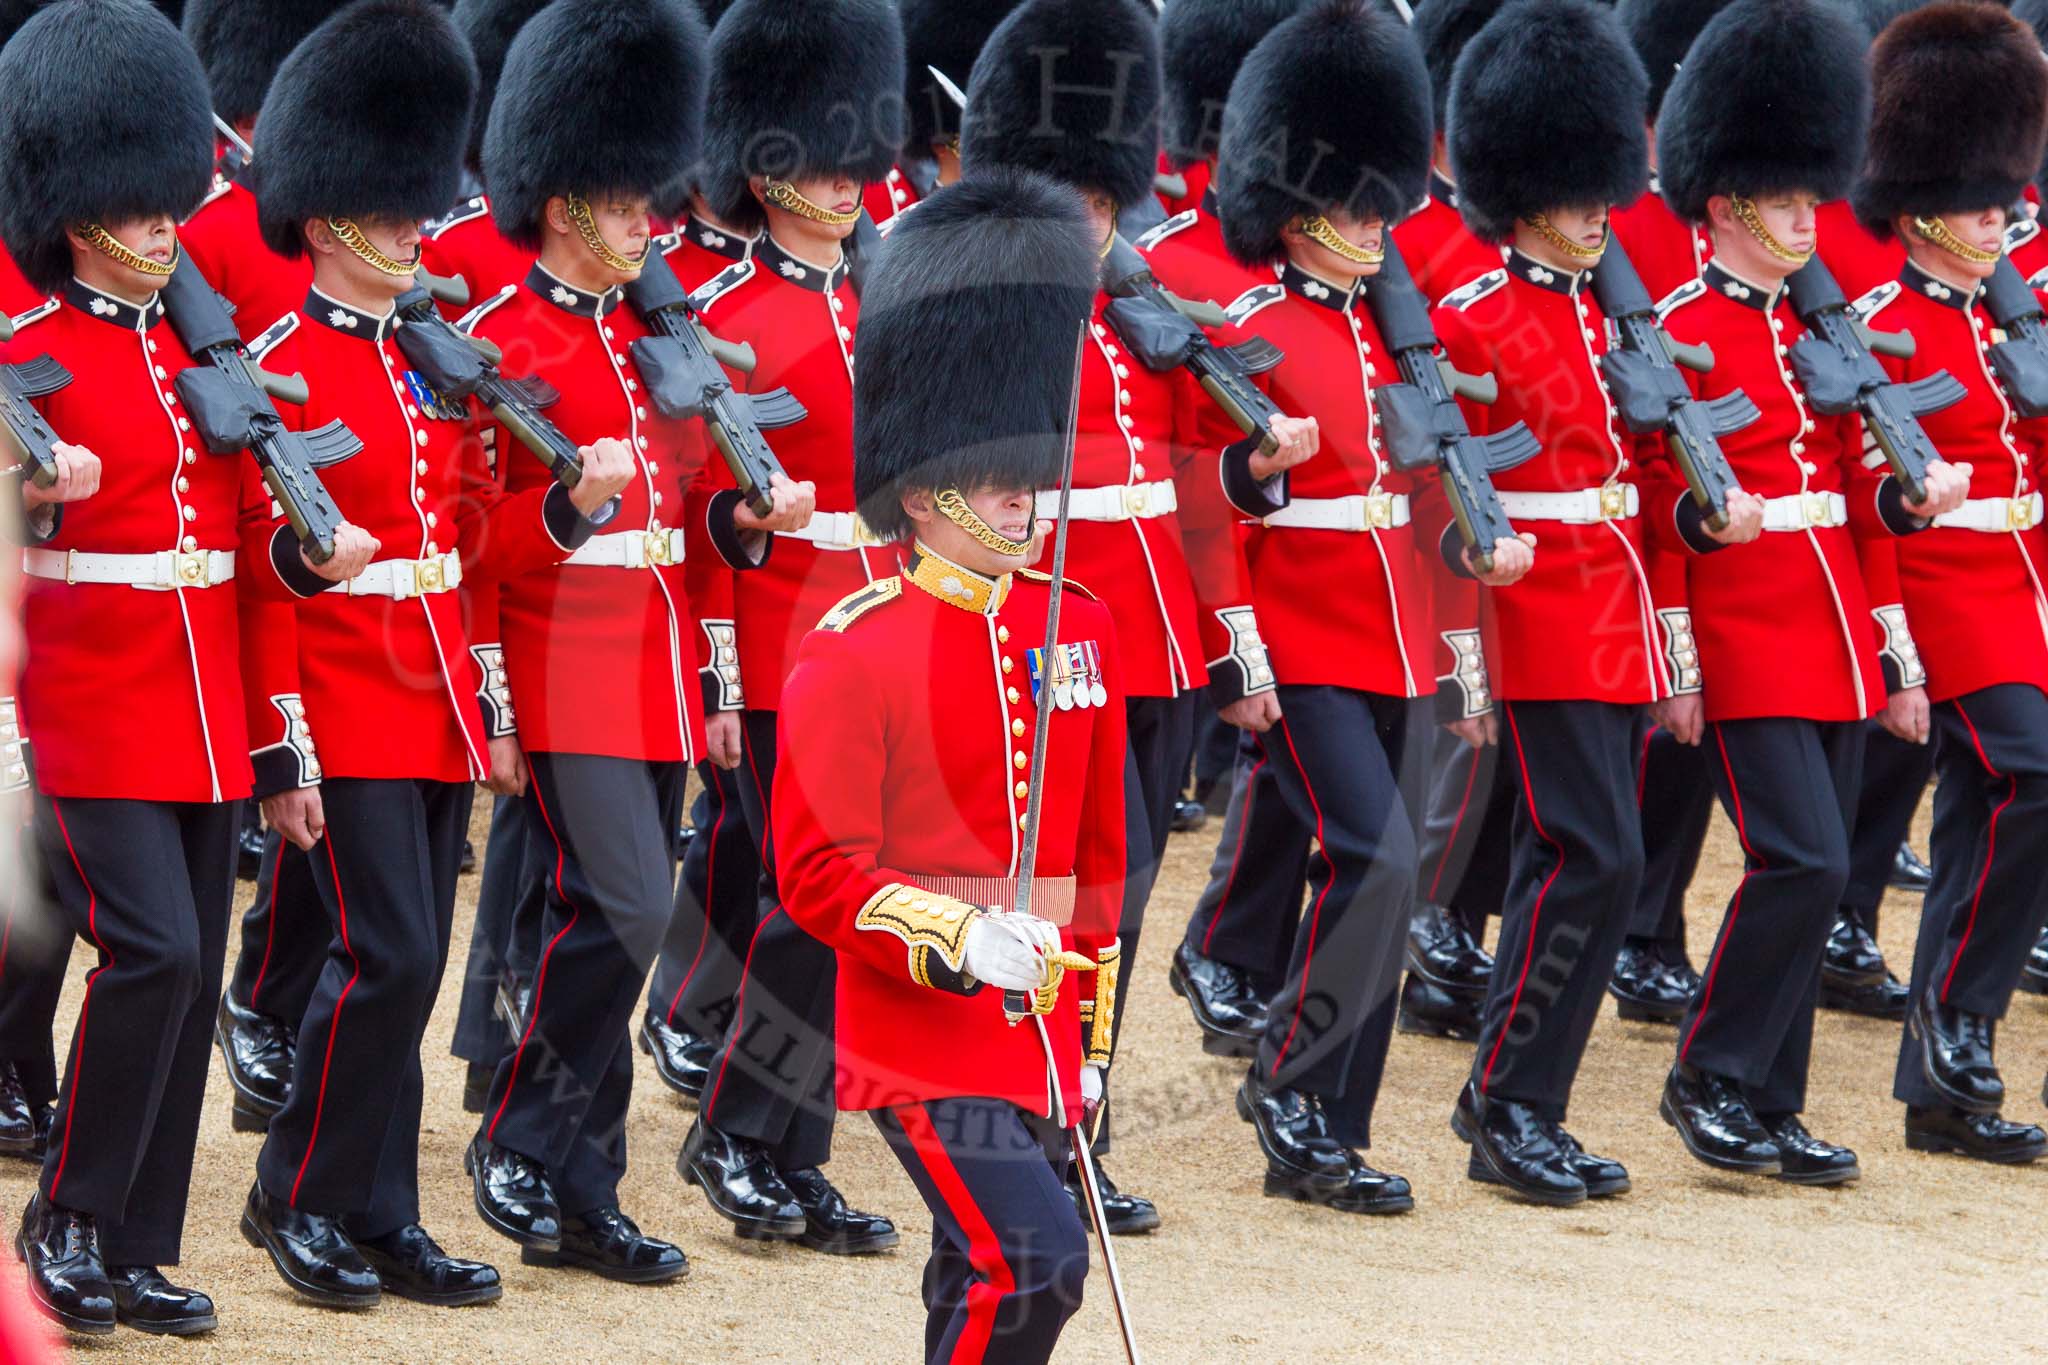 Trooping the Colour 2014.
Horse Guards Parade, Westminster,
London SW1A,

United Kingdom,
on 14 June 2014 at 11:37, image #630